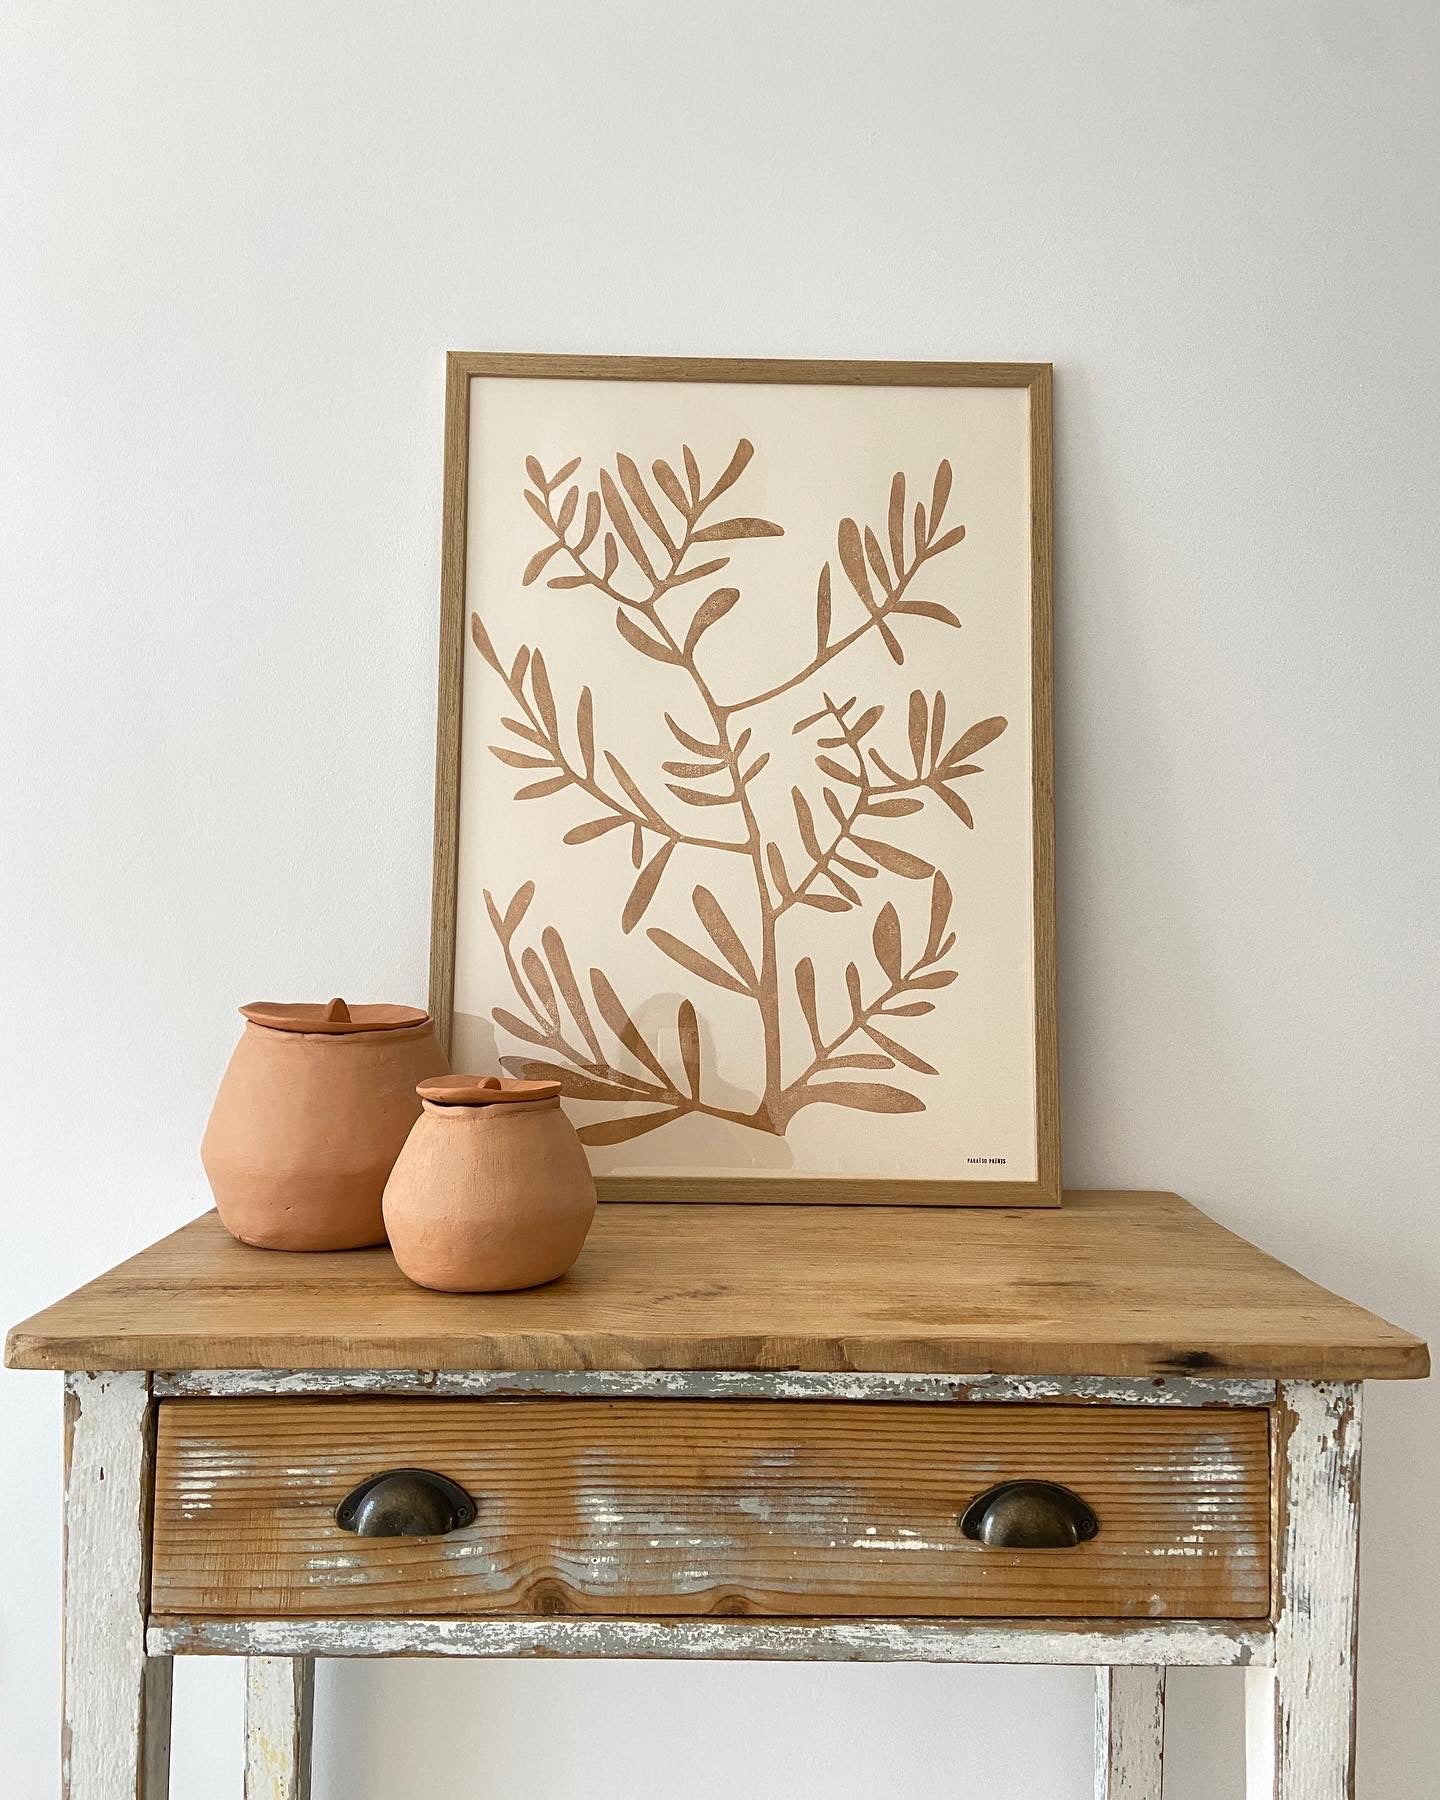 Olive tree art for sale | Olive tree drawing/prints - Paraiso prints